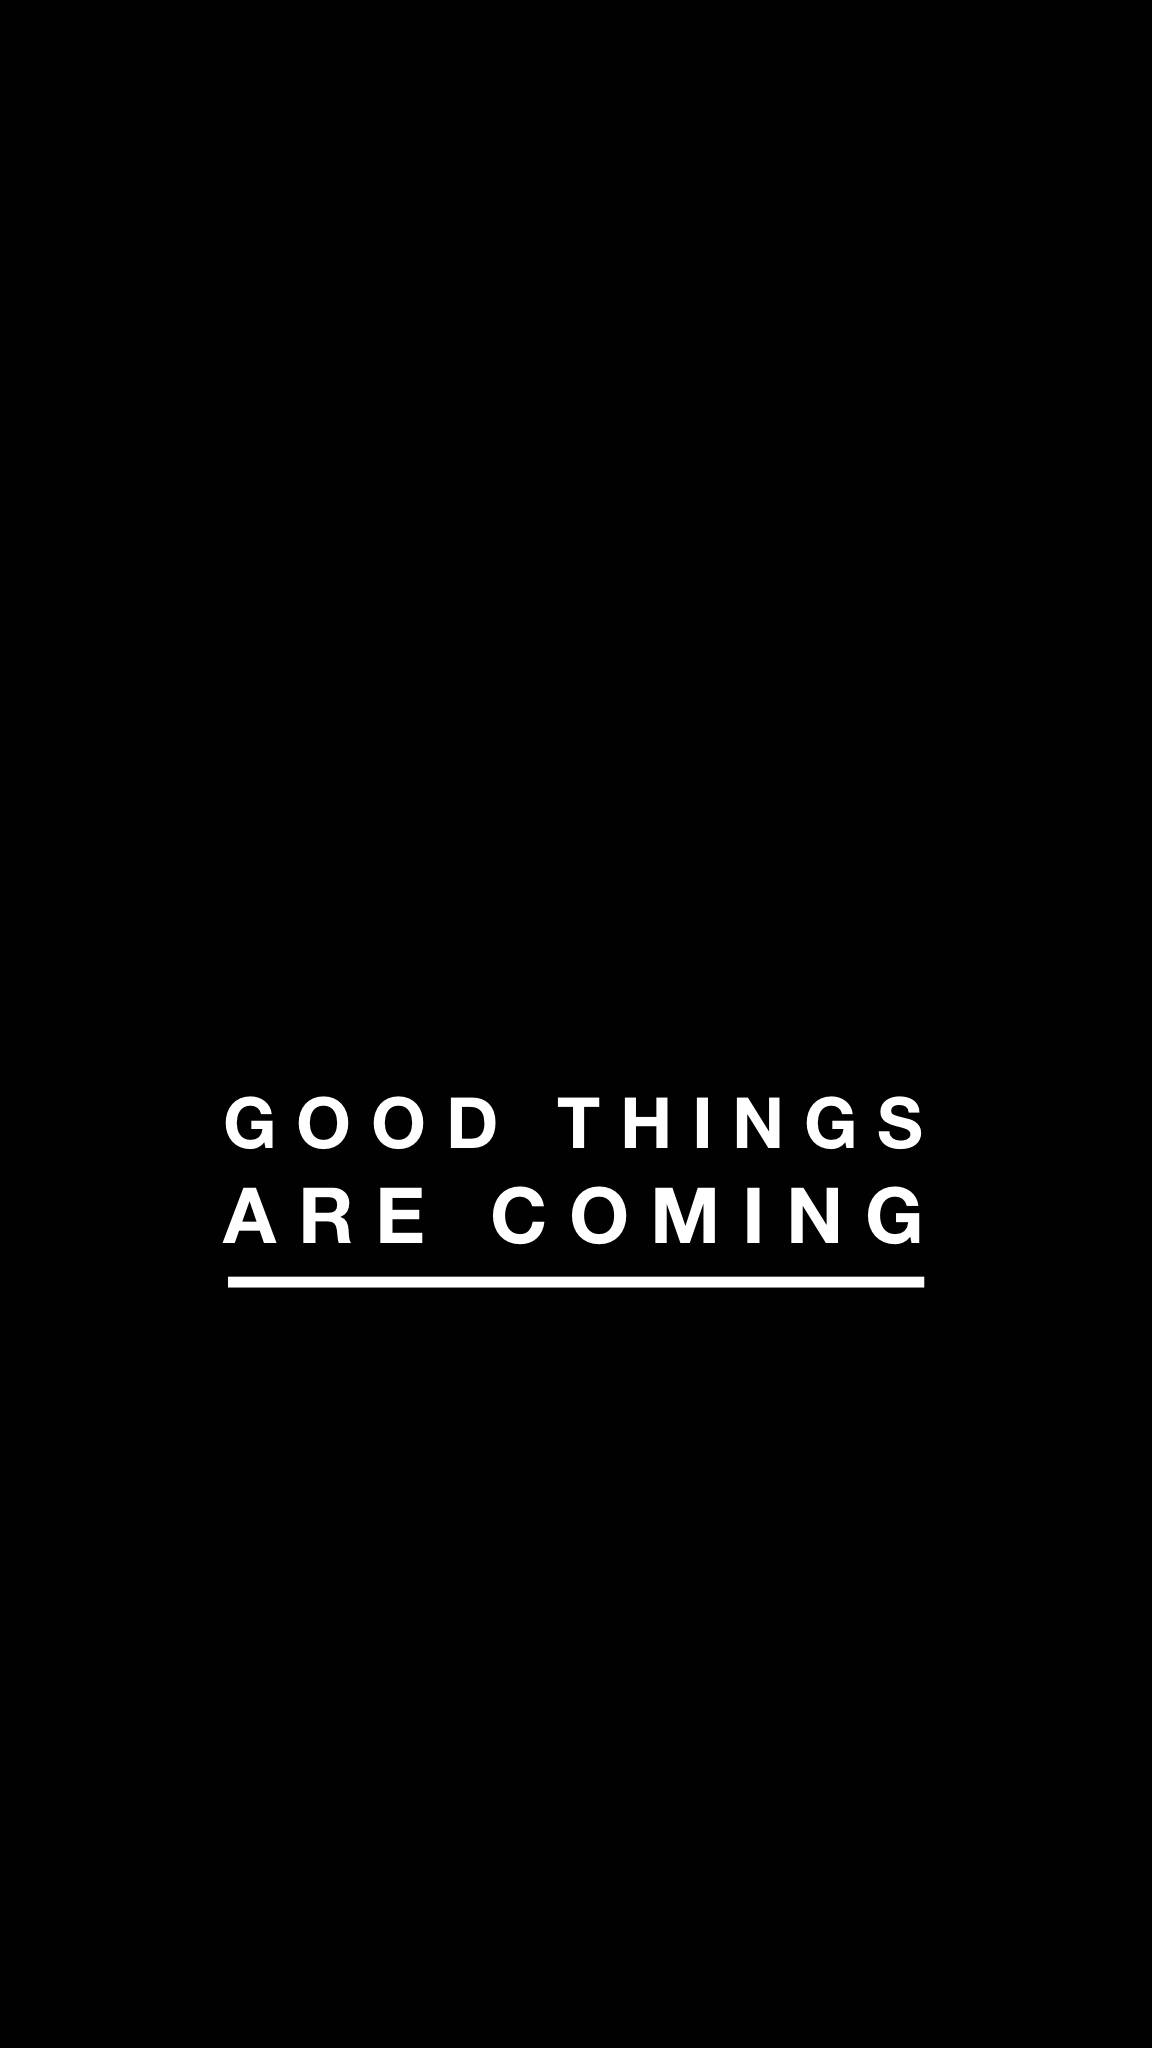 Good Things Are Coming Black And White Quotes Wallpaper